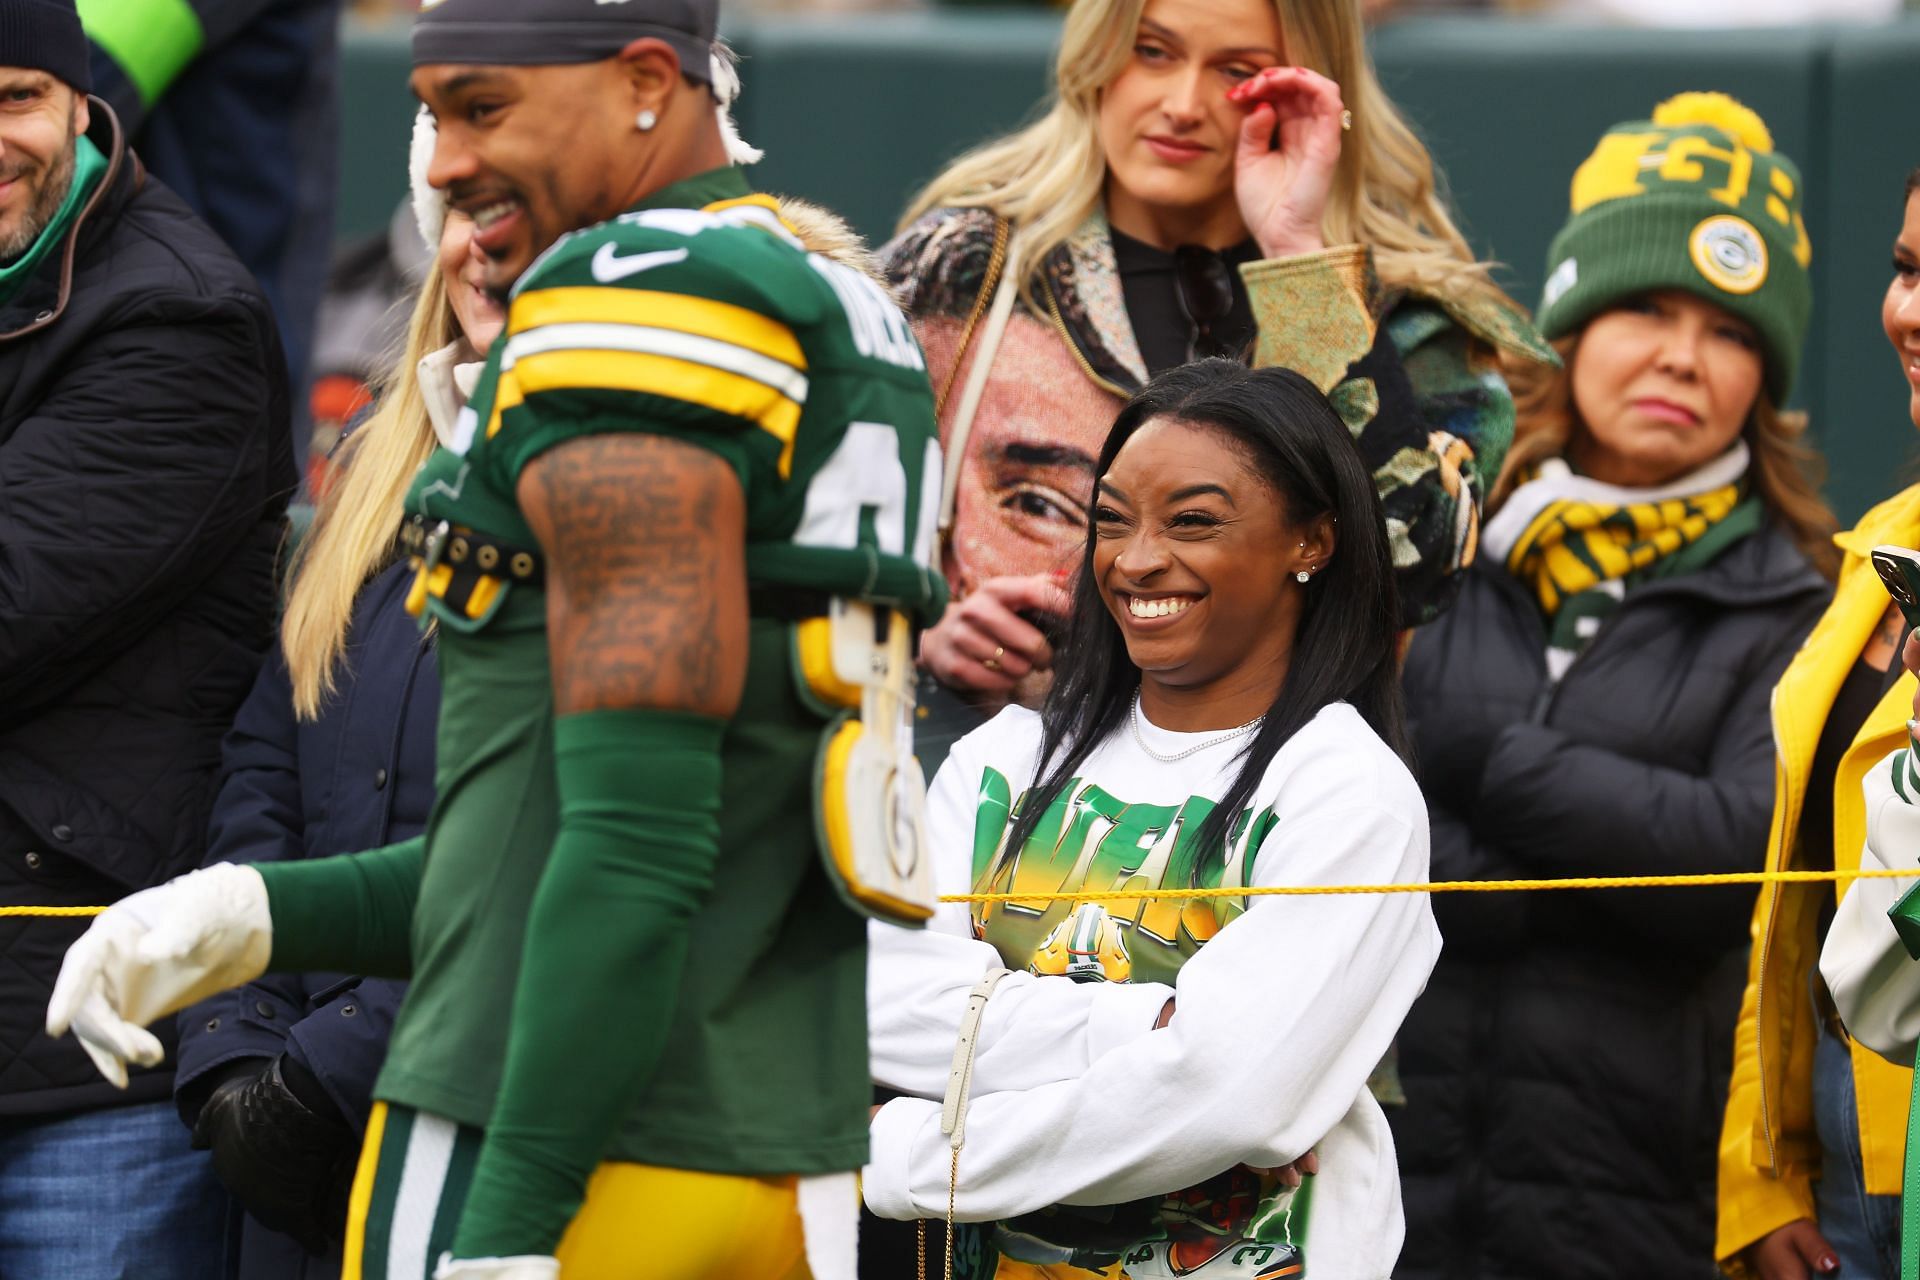 Simone Biles looks on prior to a game between the Minnesota Vikings and the Green Bay Packers at Lambeau Field in Green Bay, Wisconsin.